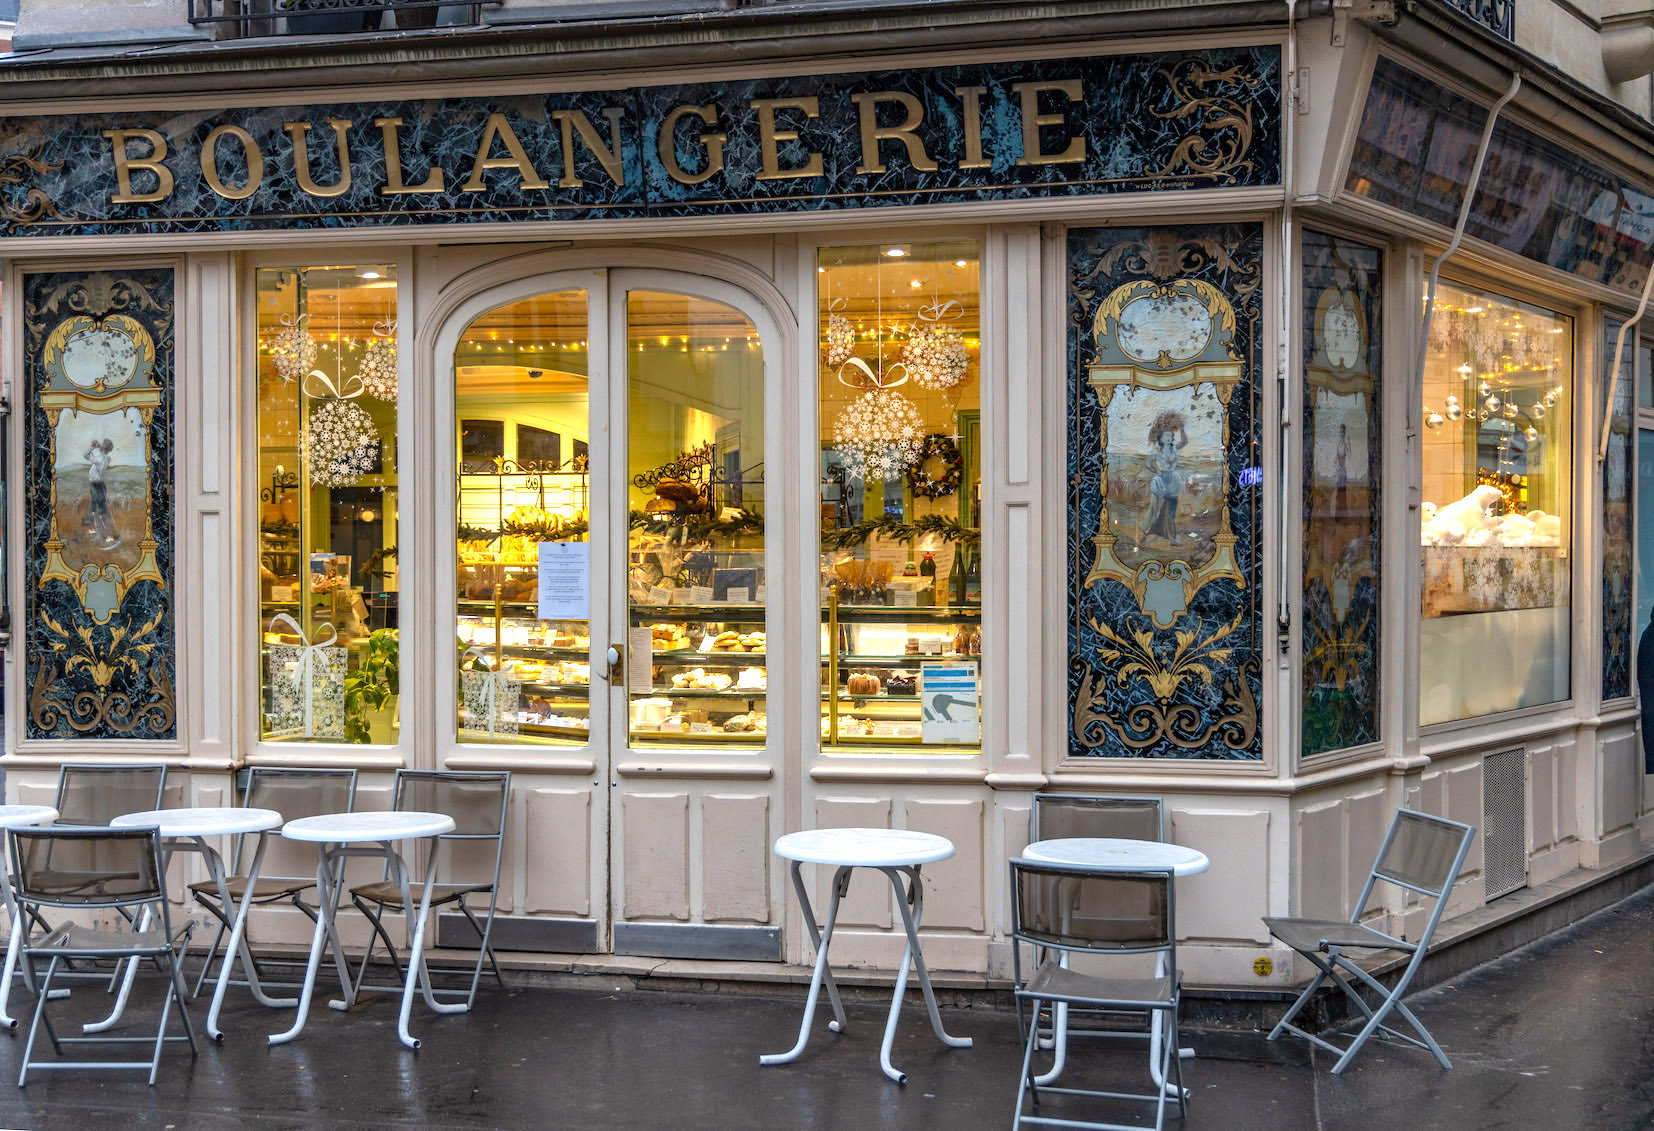 The old-fashioned façade of Boulangerie Bo in the 12th arrondissement in Paris.